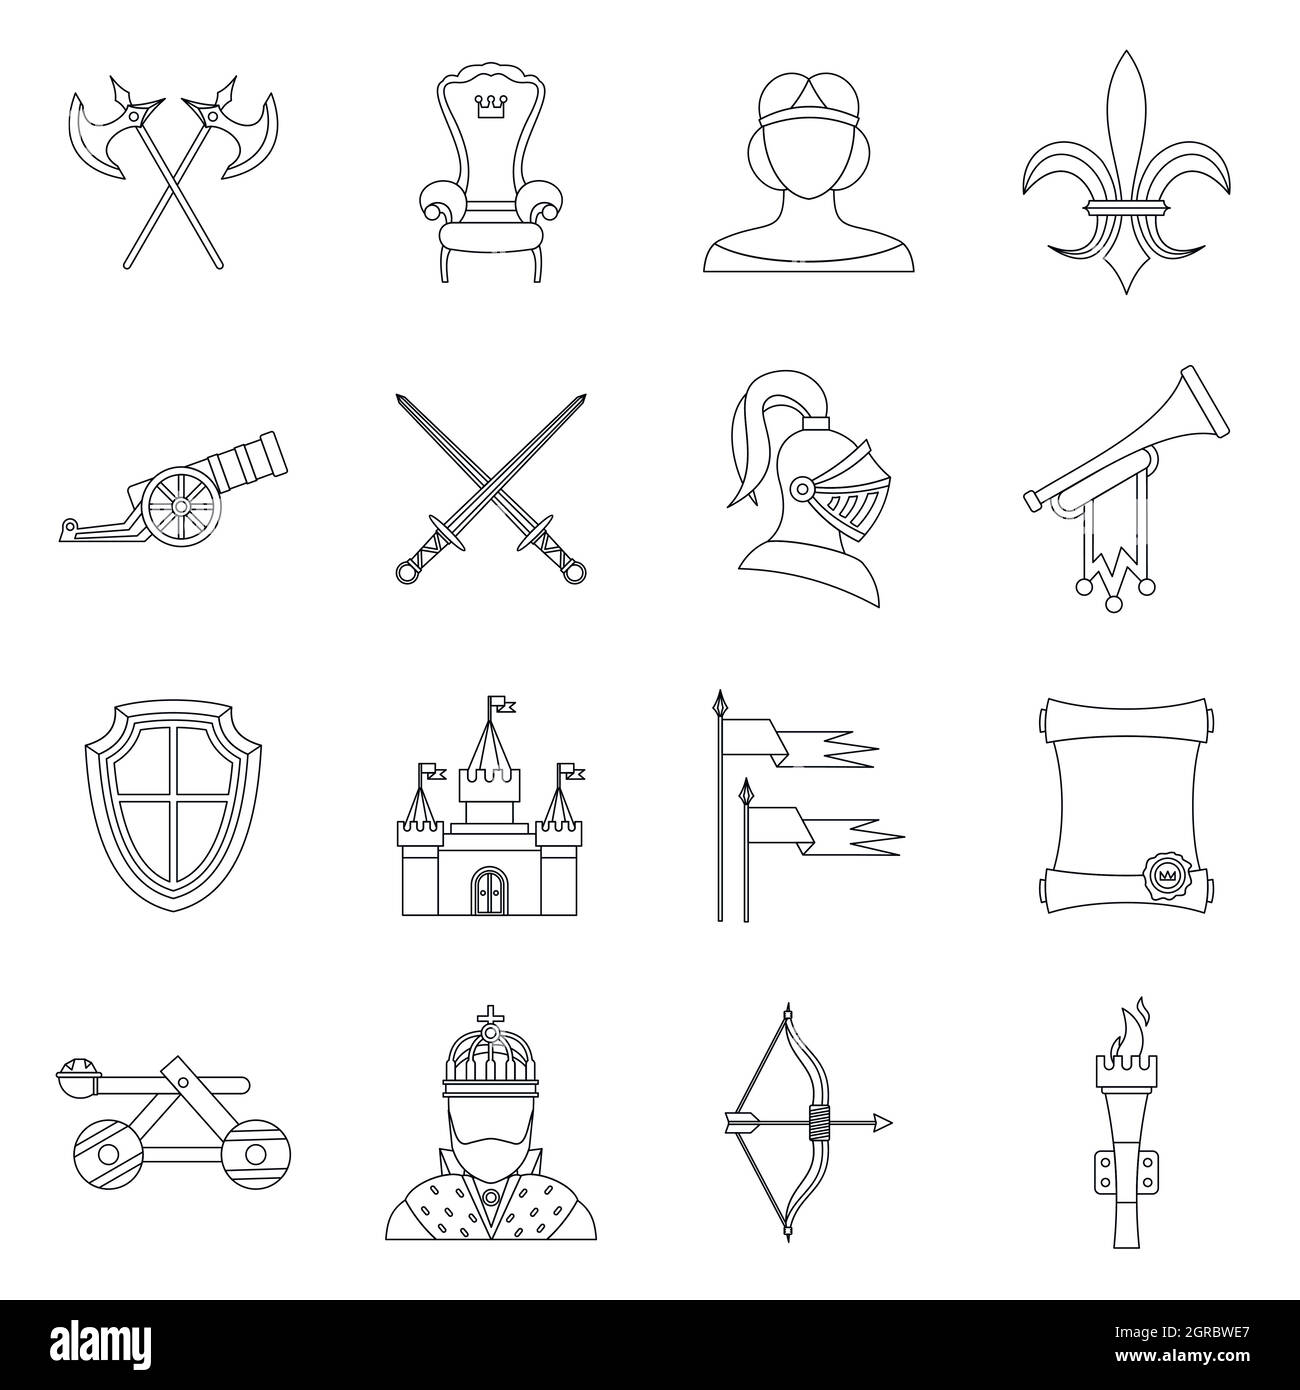 Knight medieval icons set, outline style. Stock Vector